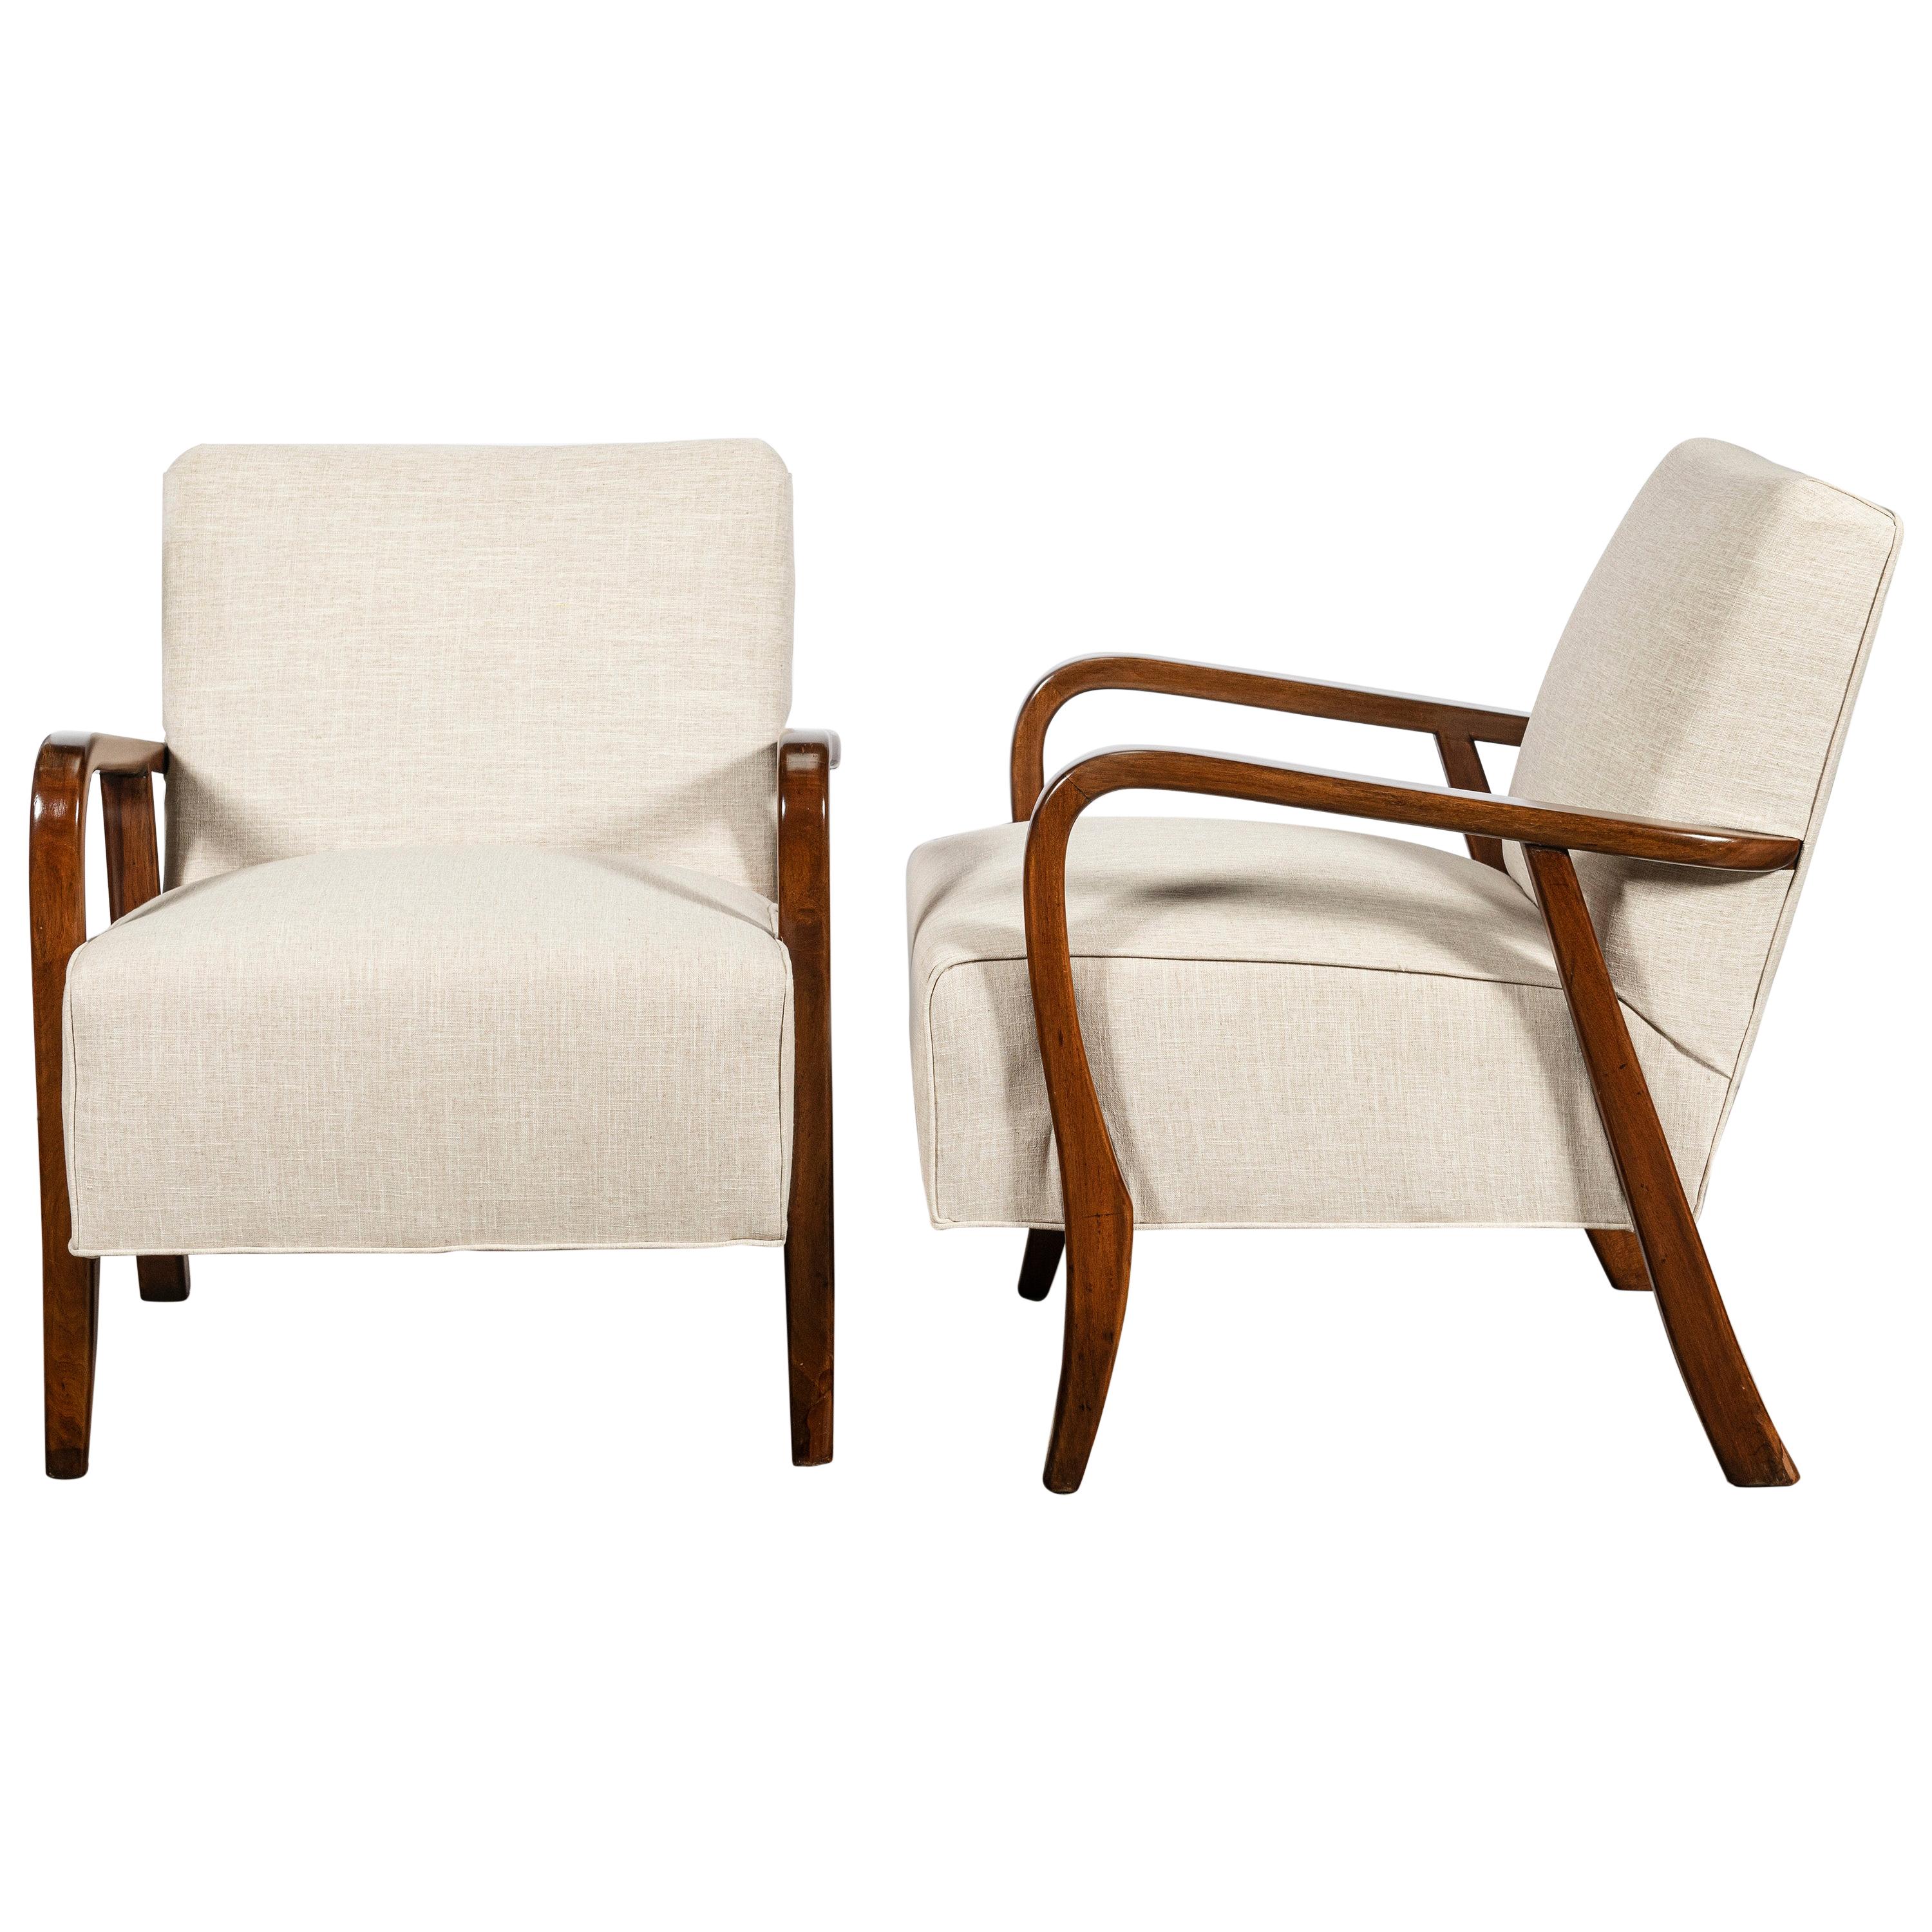 Pair of Wood and Fabric Armchairs by Nordiska, Argentina, circa 1950 For Sale